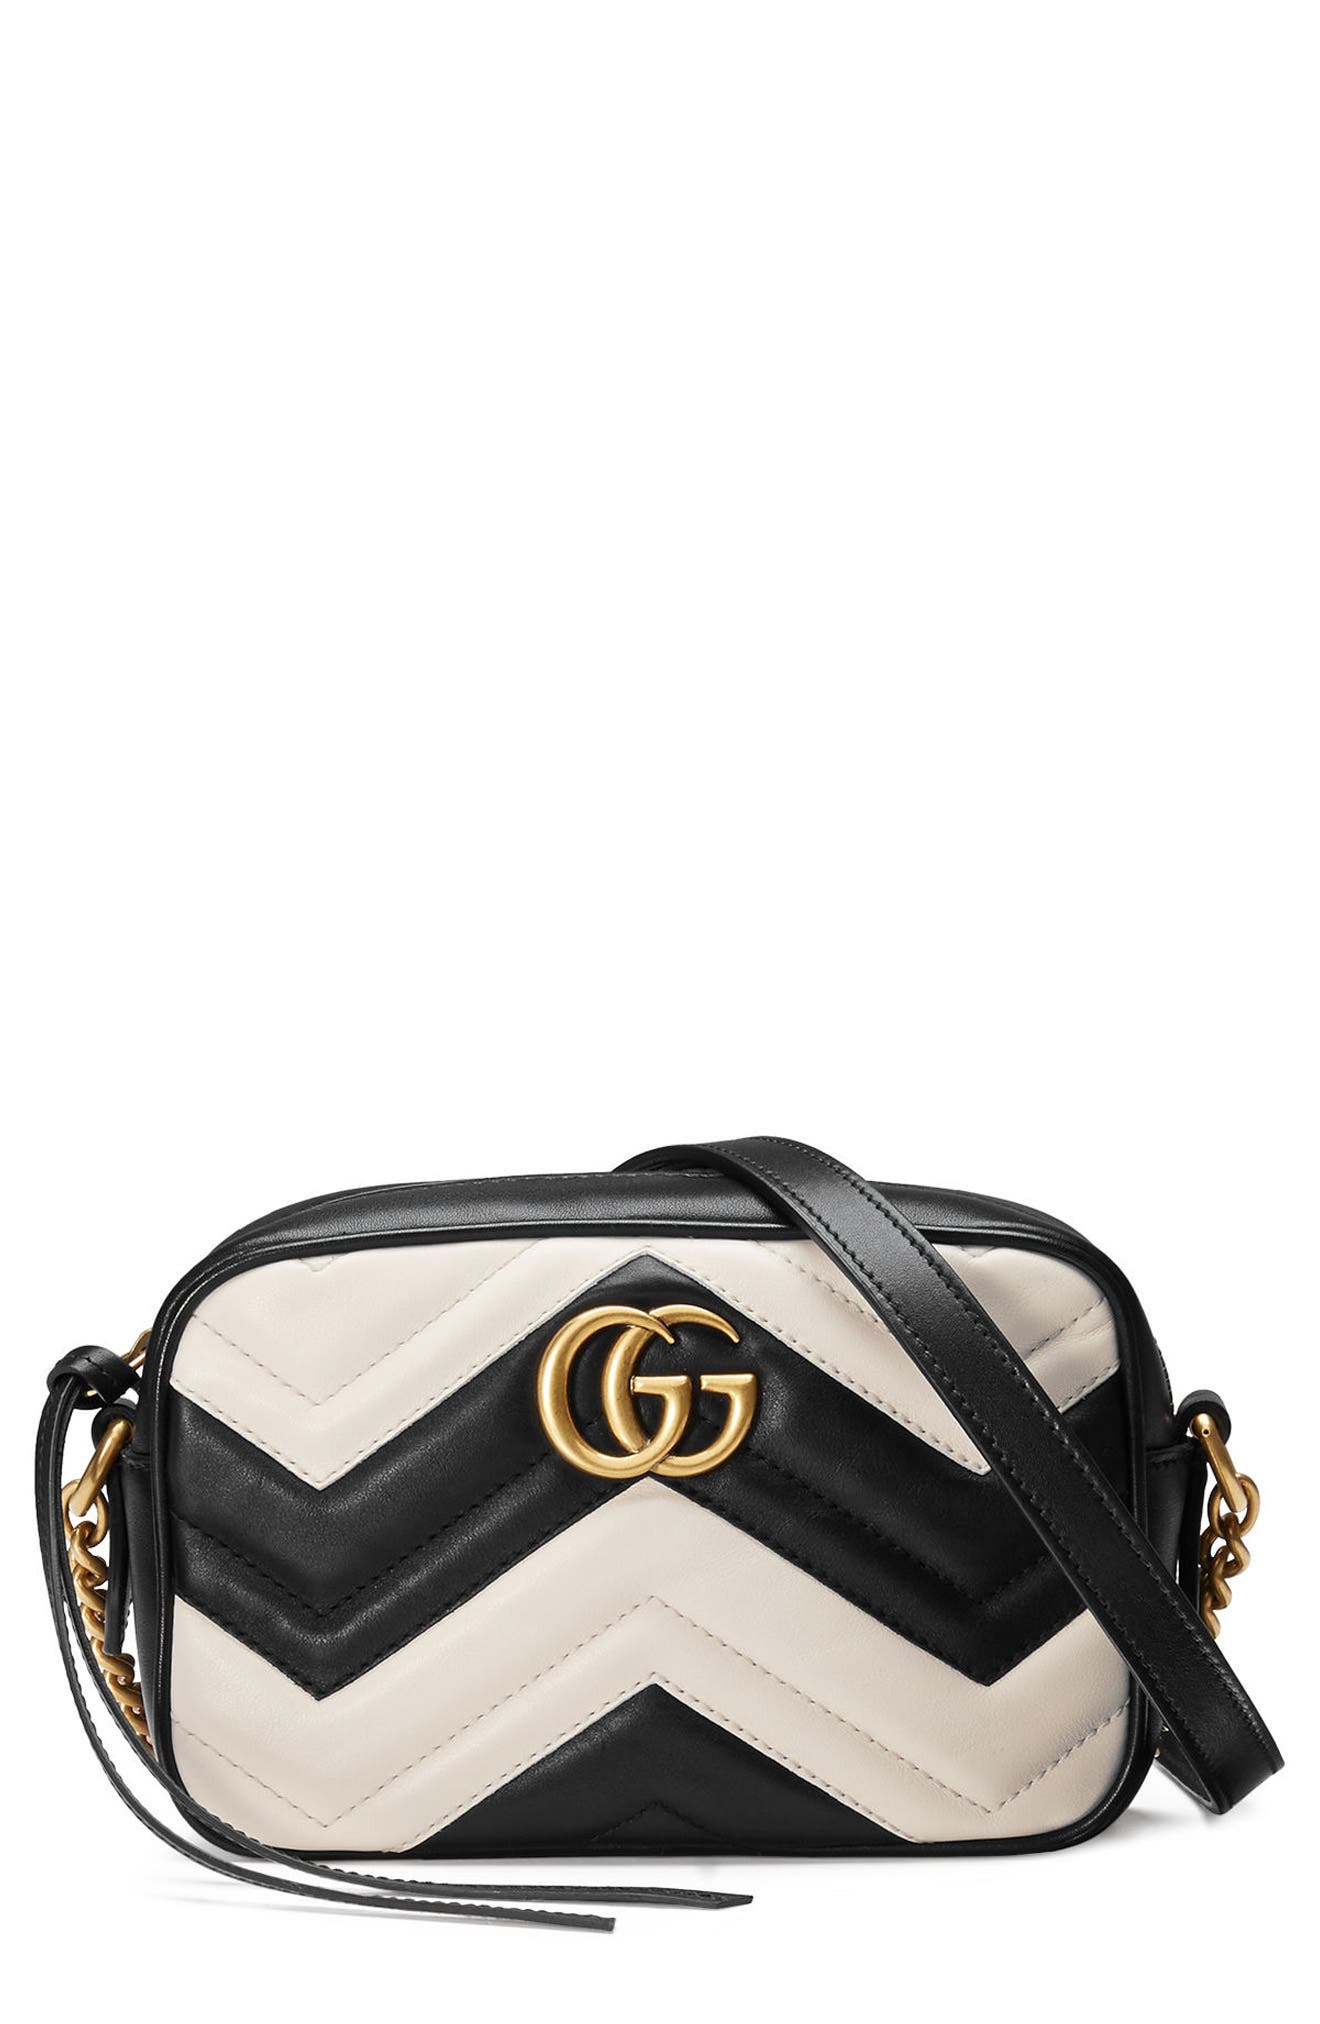 gucci marmont black and white